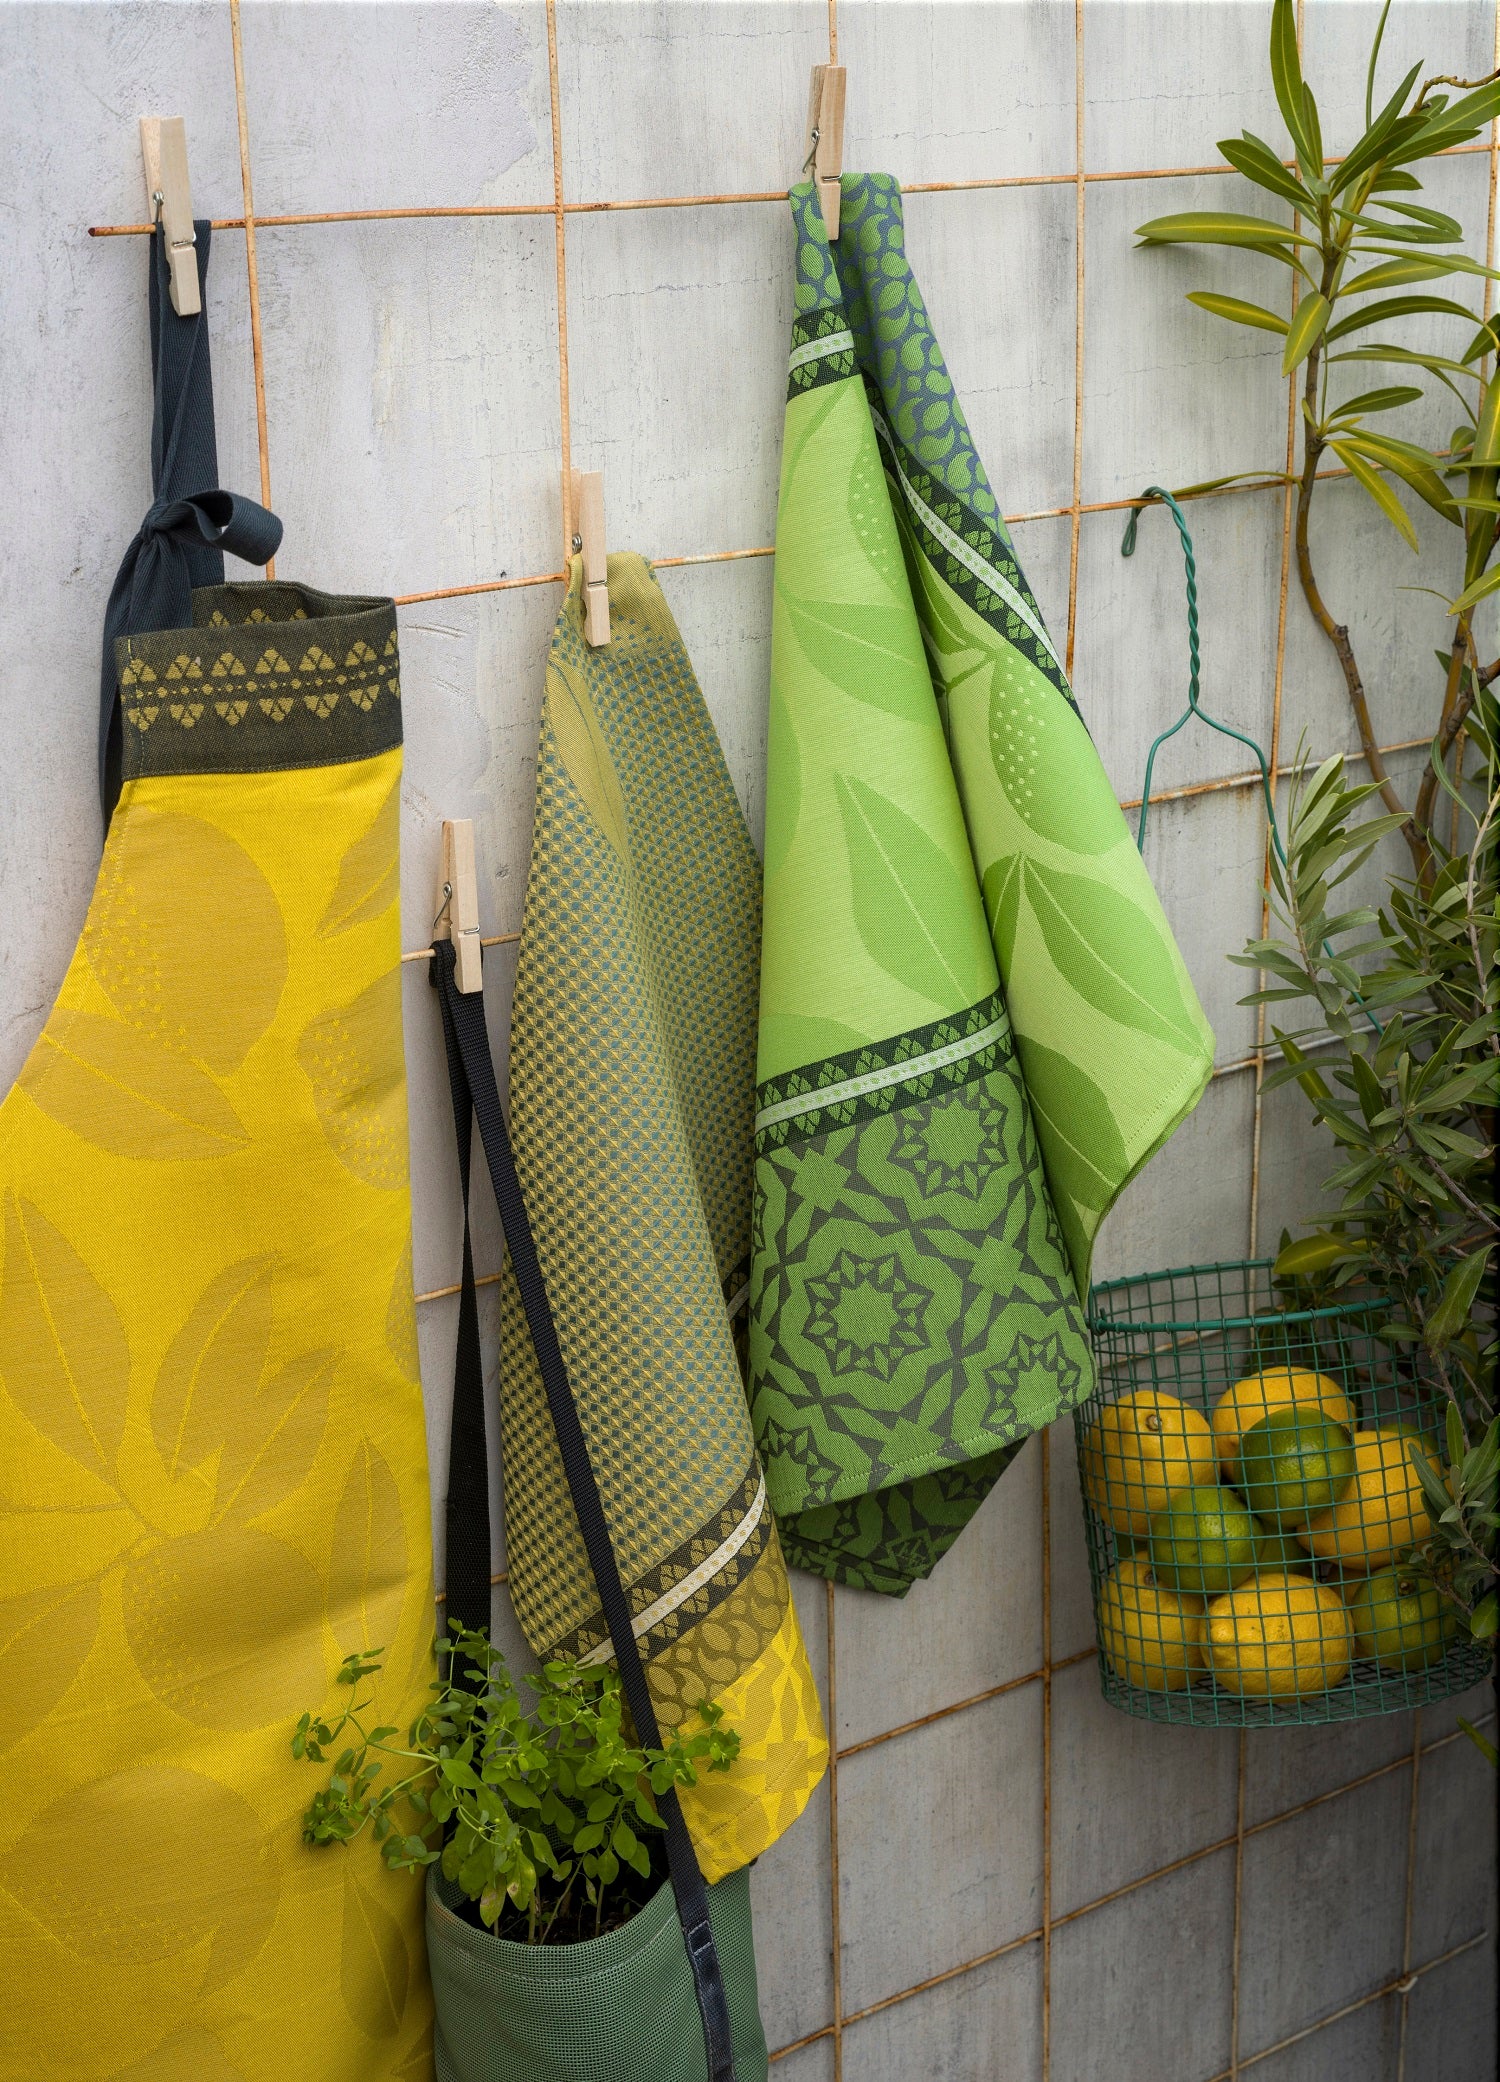 Jacquard Francais "Sous les Citronniers" (Yellow), Woven cotton hand towel. Made in France.